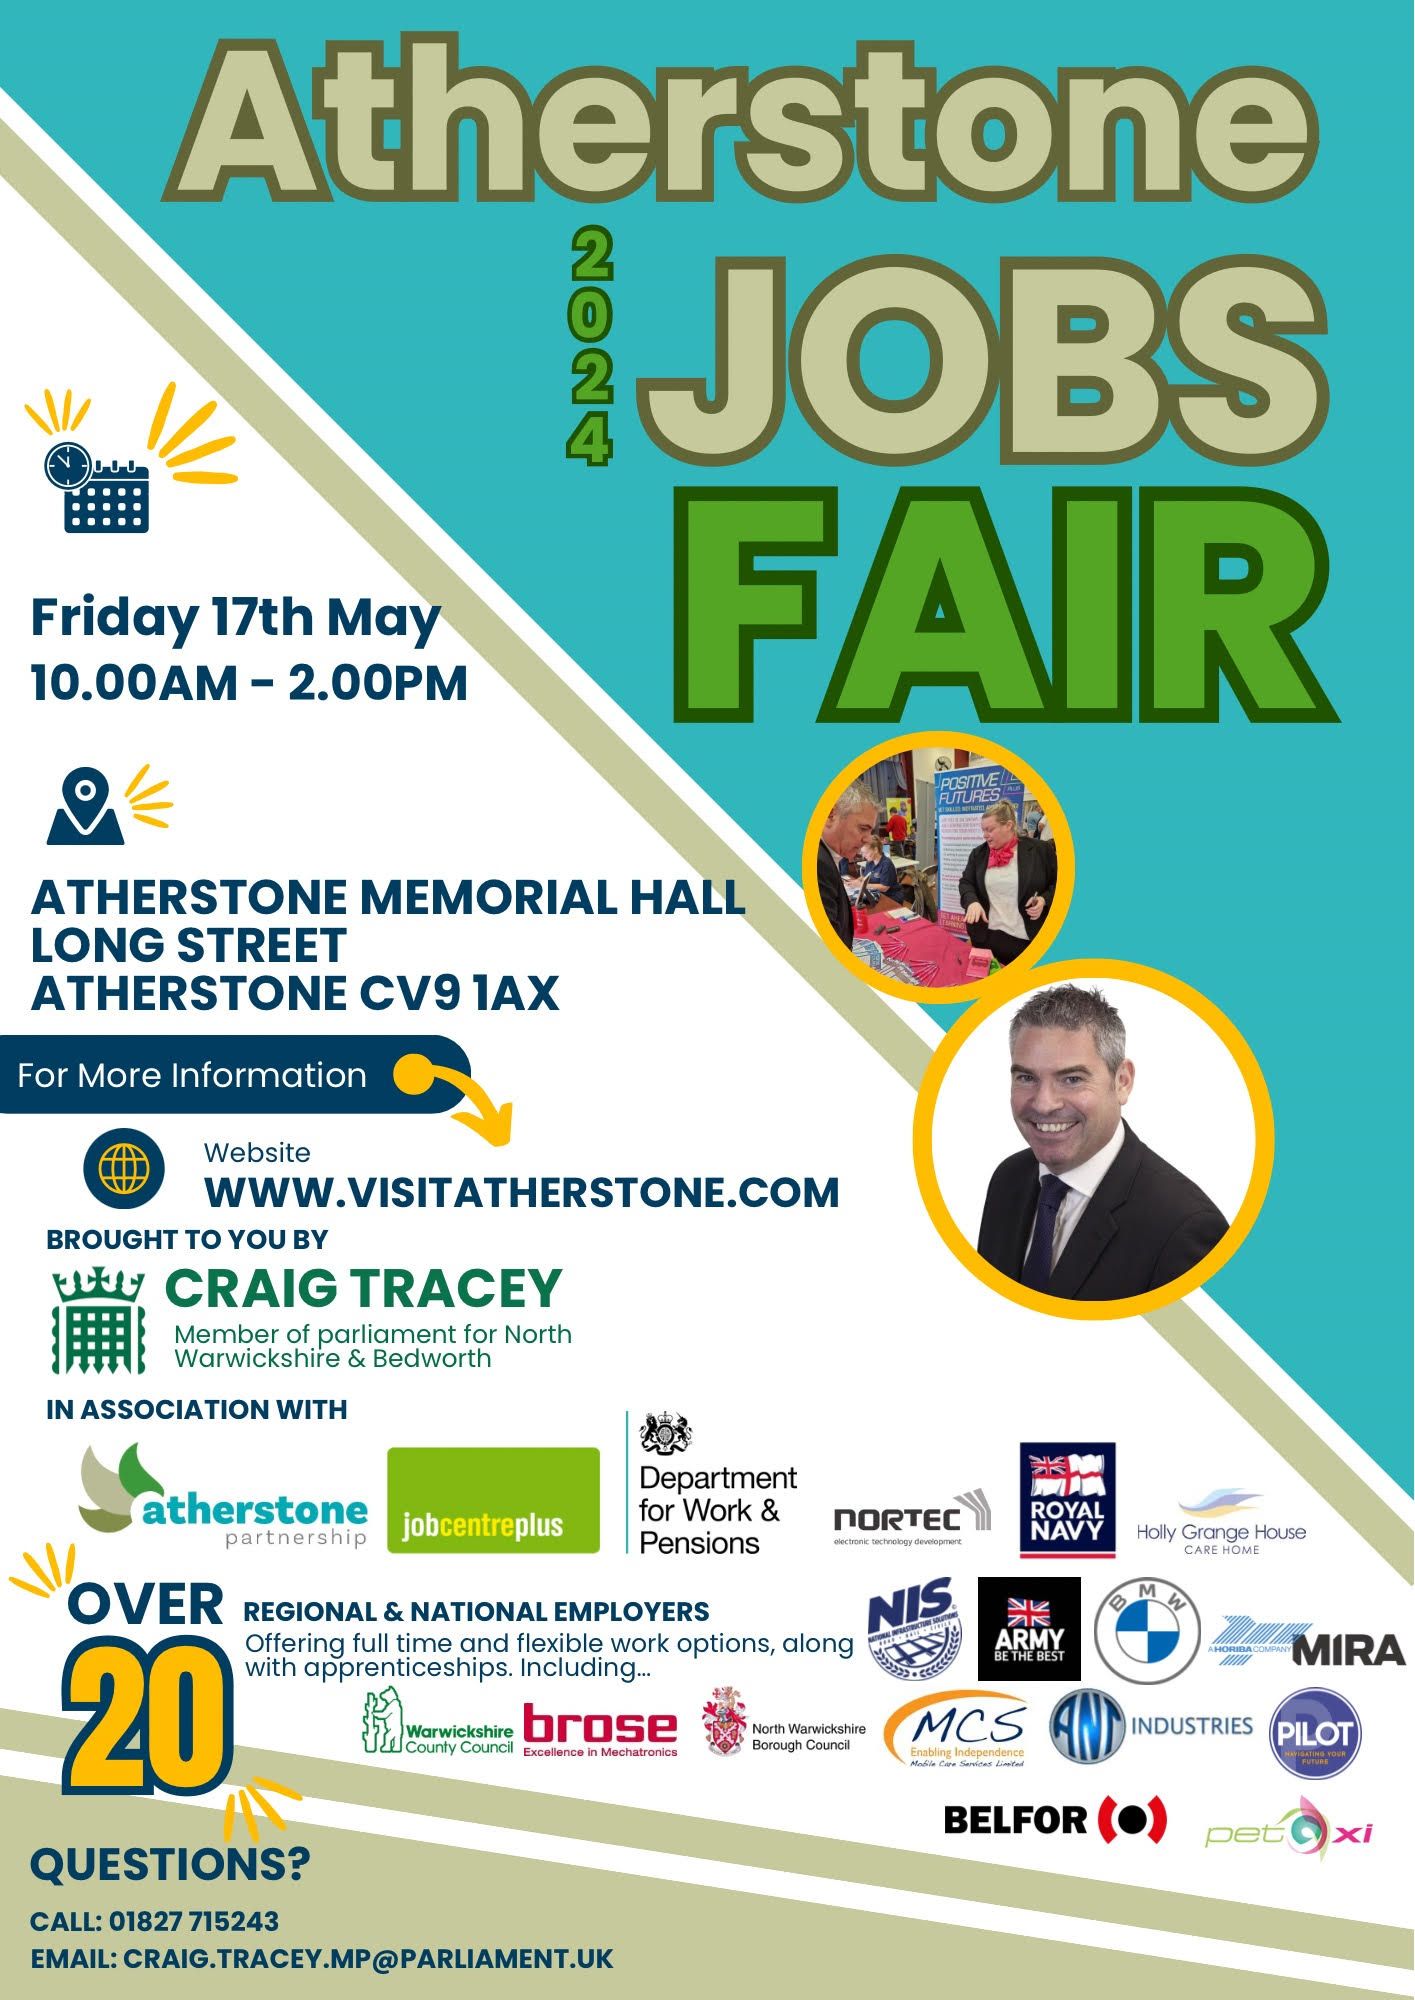 Atherstone Jobs Fair - Friday 17th May 10am - 2pm. Atherstone Memorial Hall 